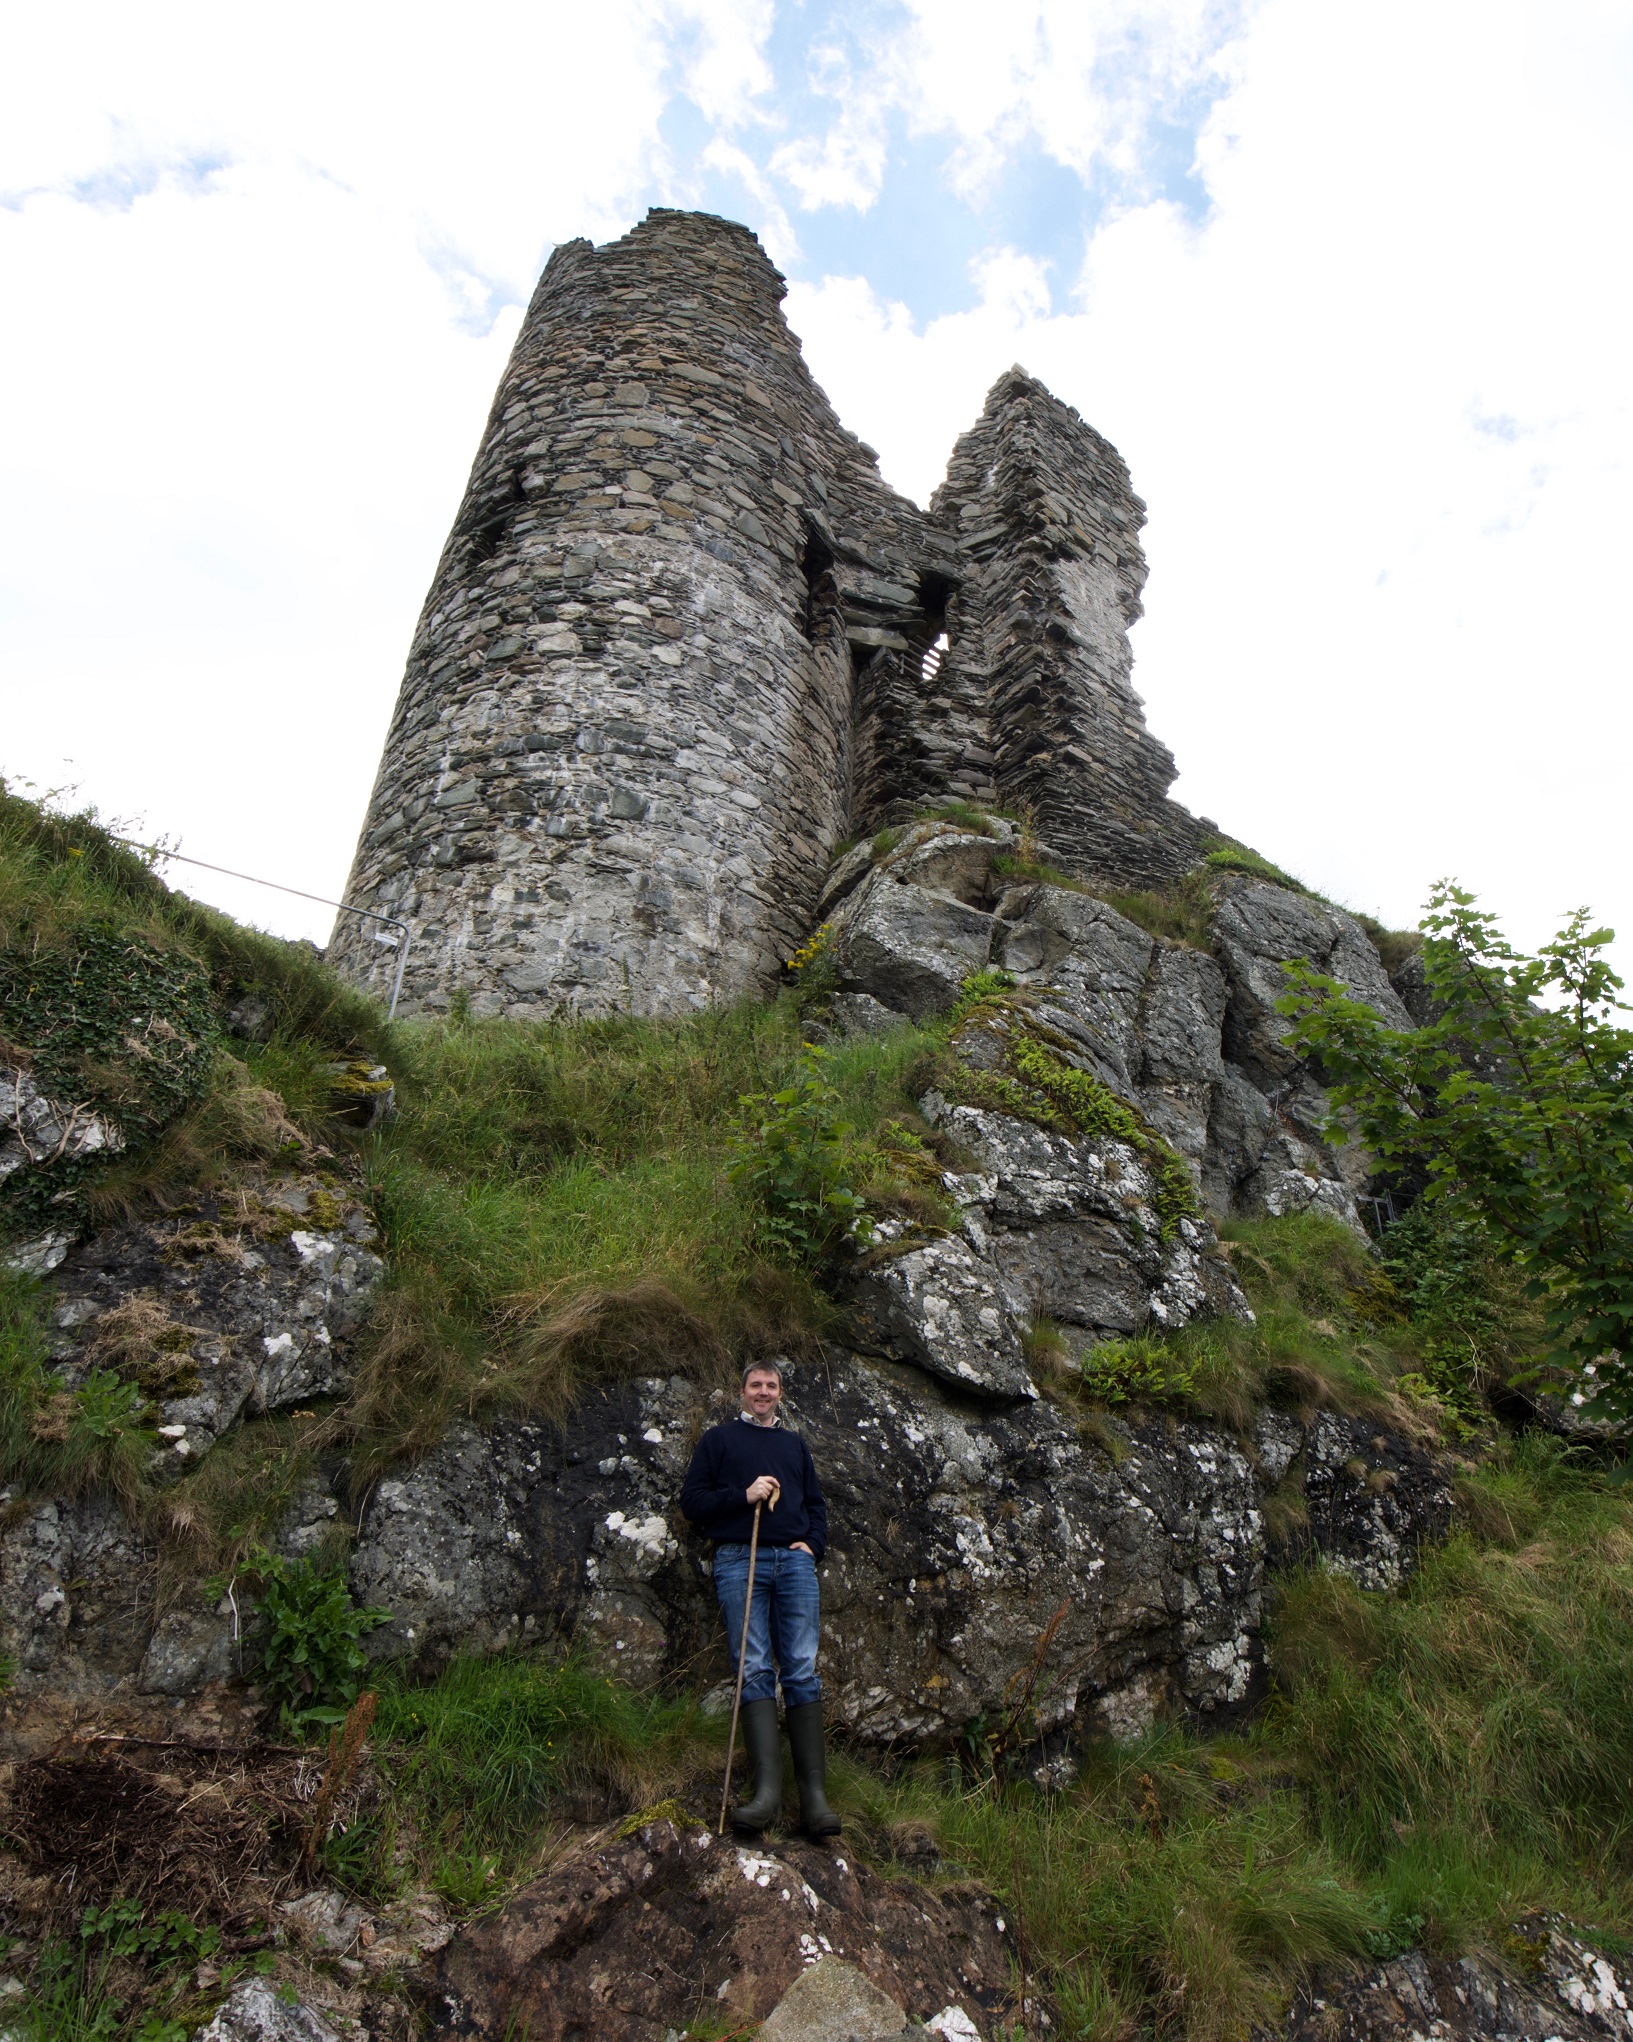 A man with a dog in front of the imposing Castle Sween ruin